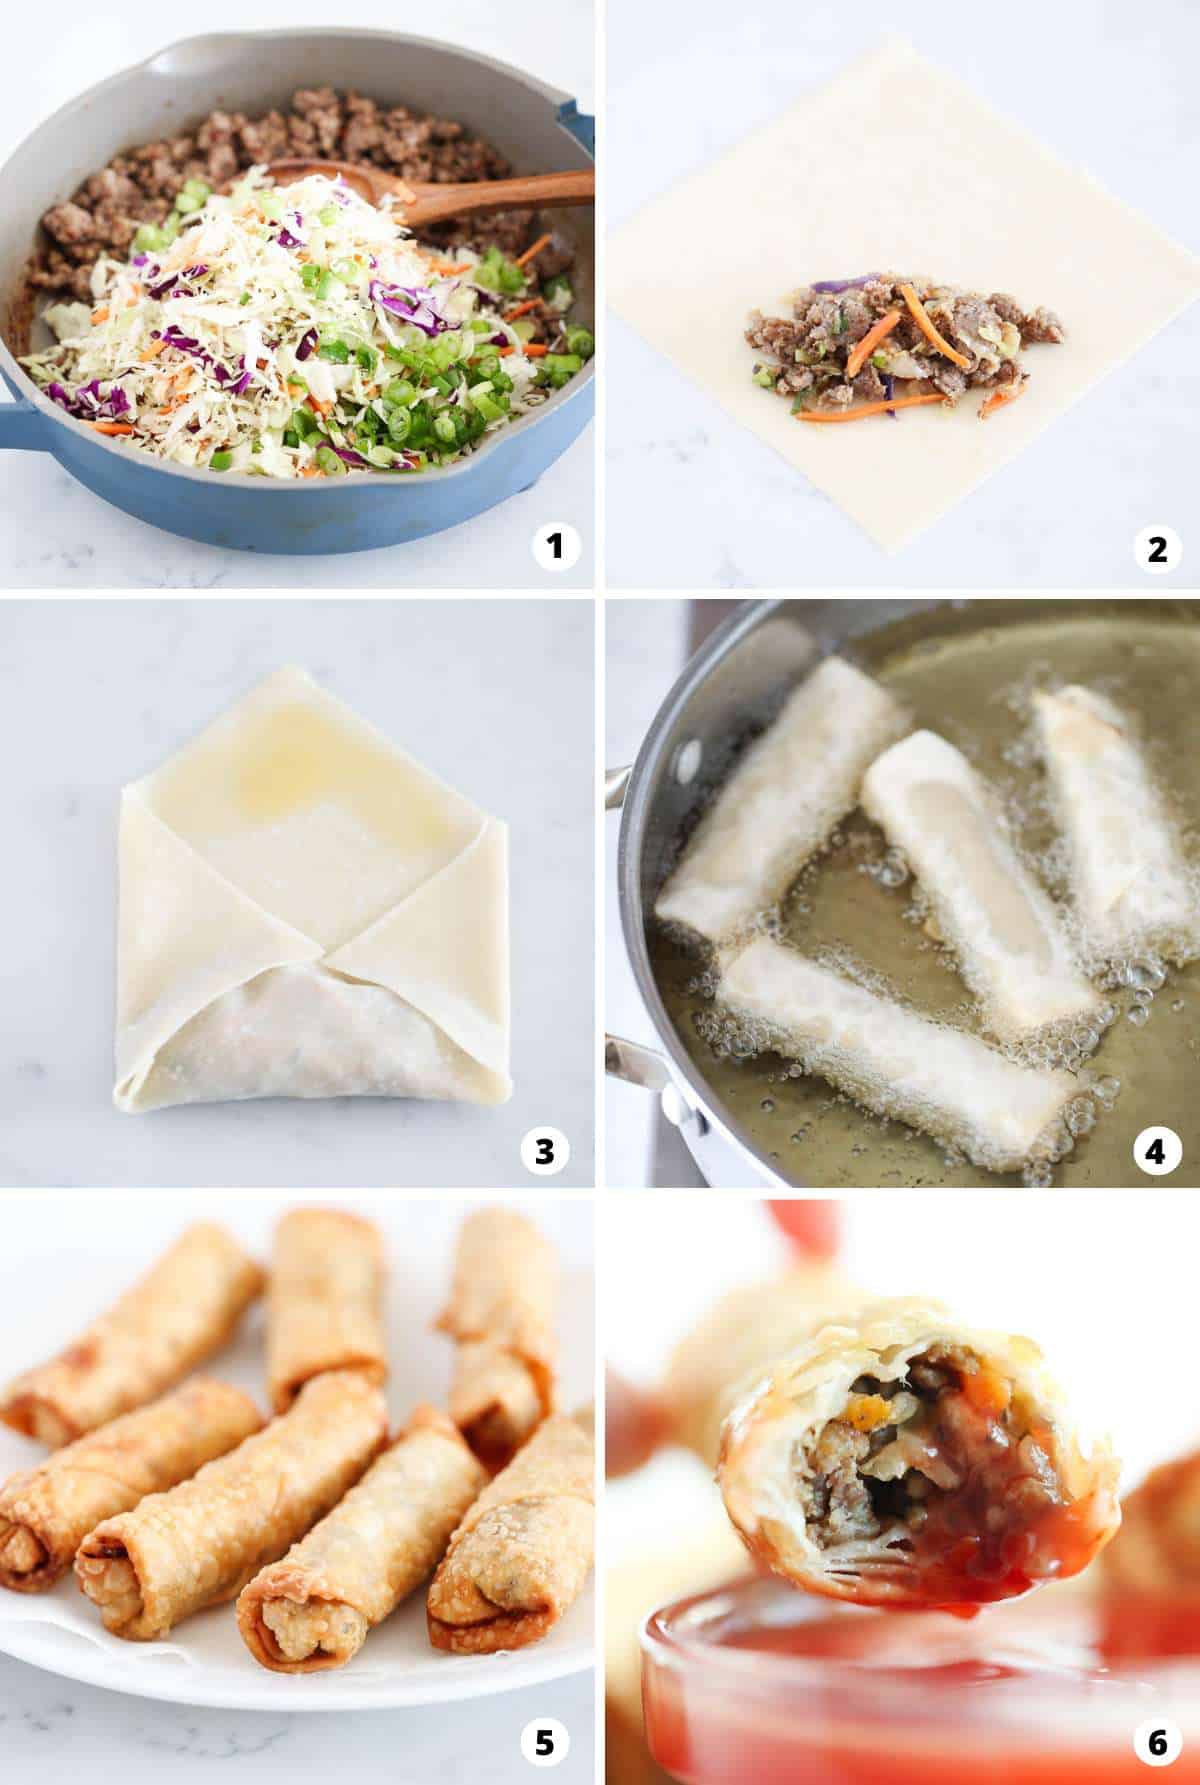 Step by step egg roll instructions in a collage. 